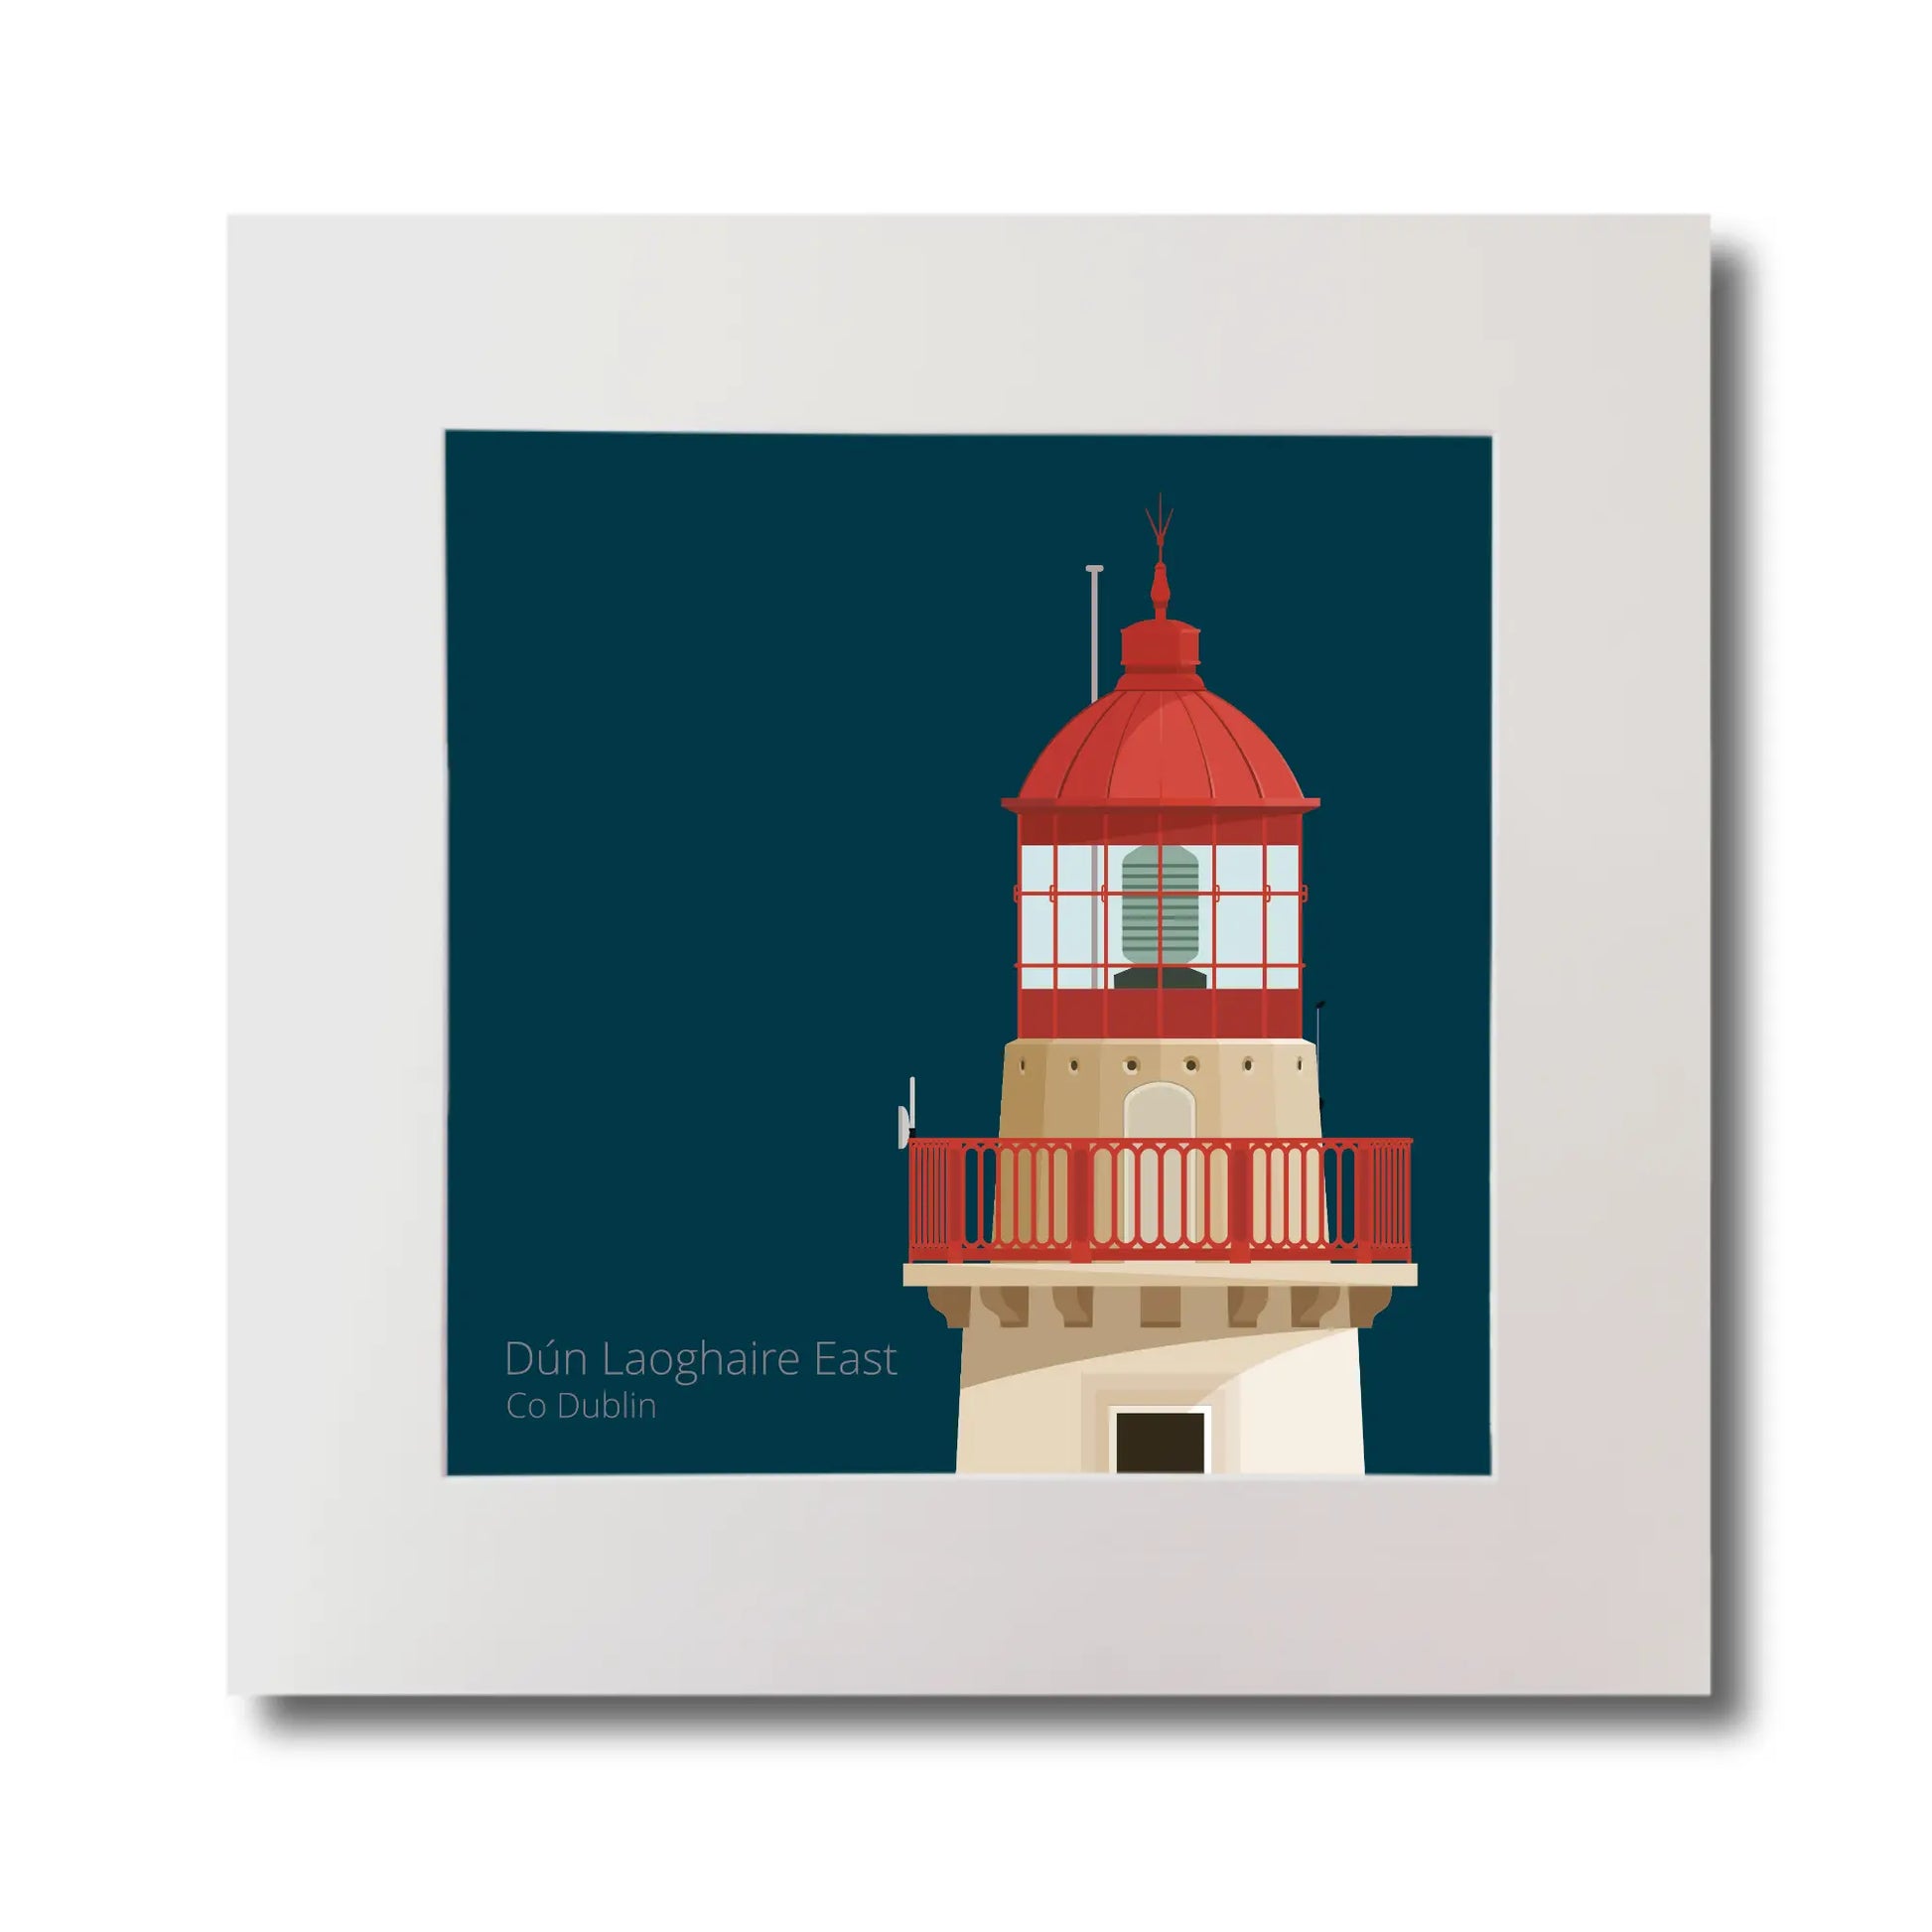 Illustration of Dún Laoghaire East lighthouse on a midnight blue background, mounted and measuring 30x30cm.